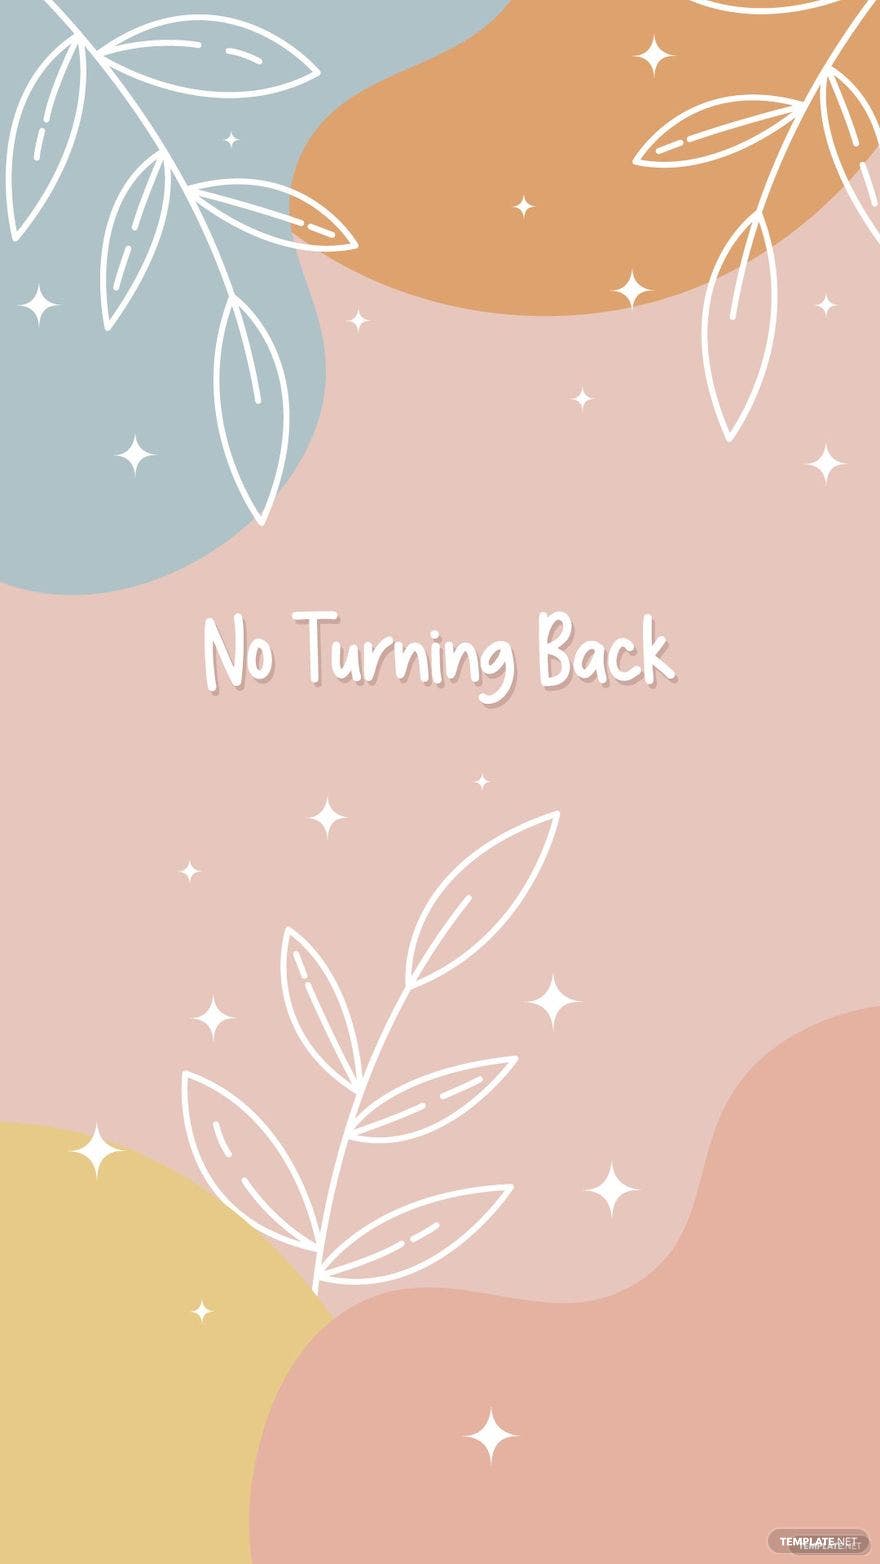 No turning back quote on a colorful background - Boho